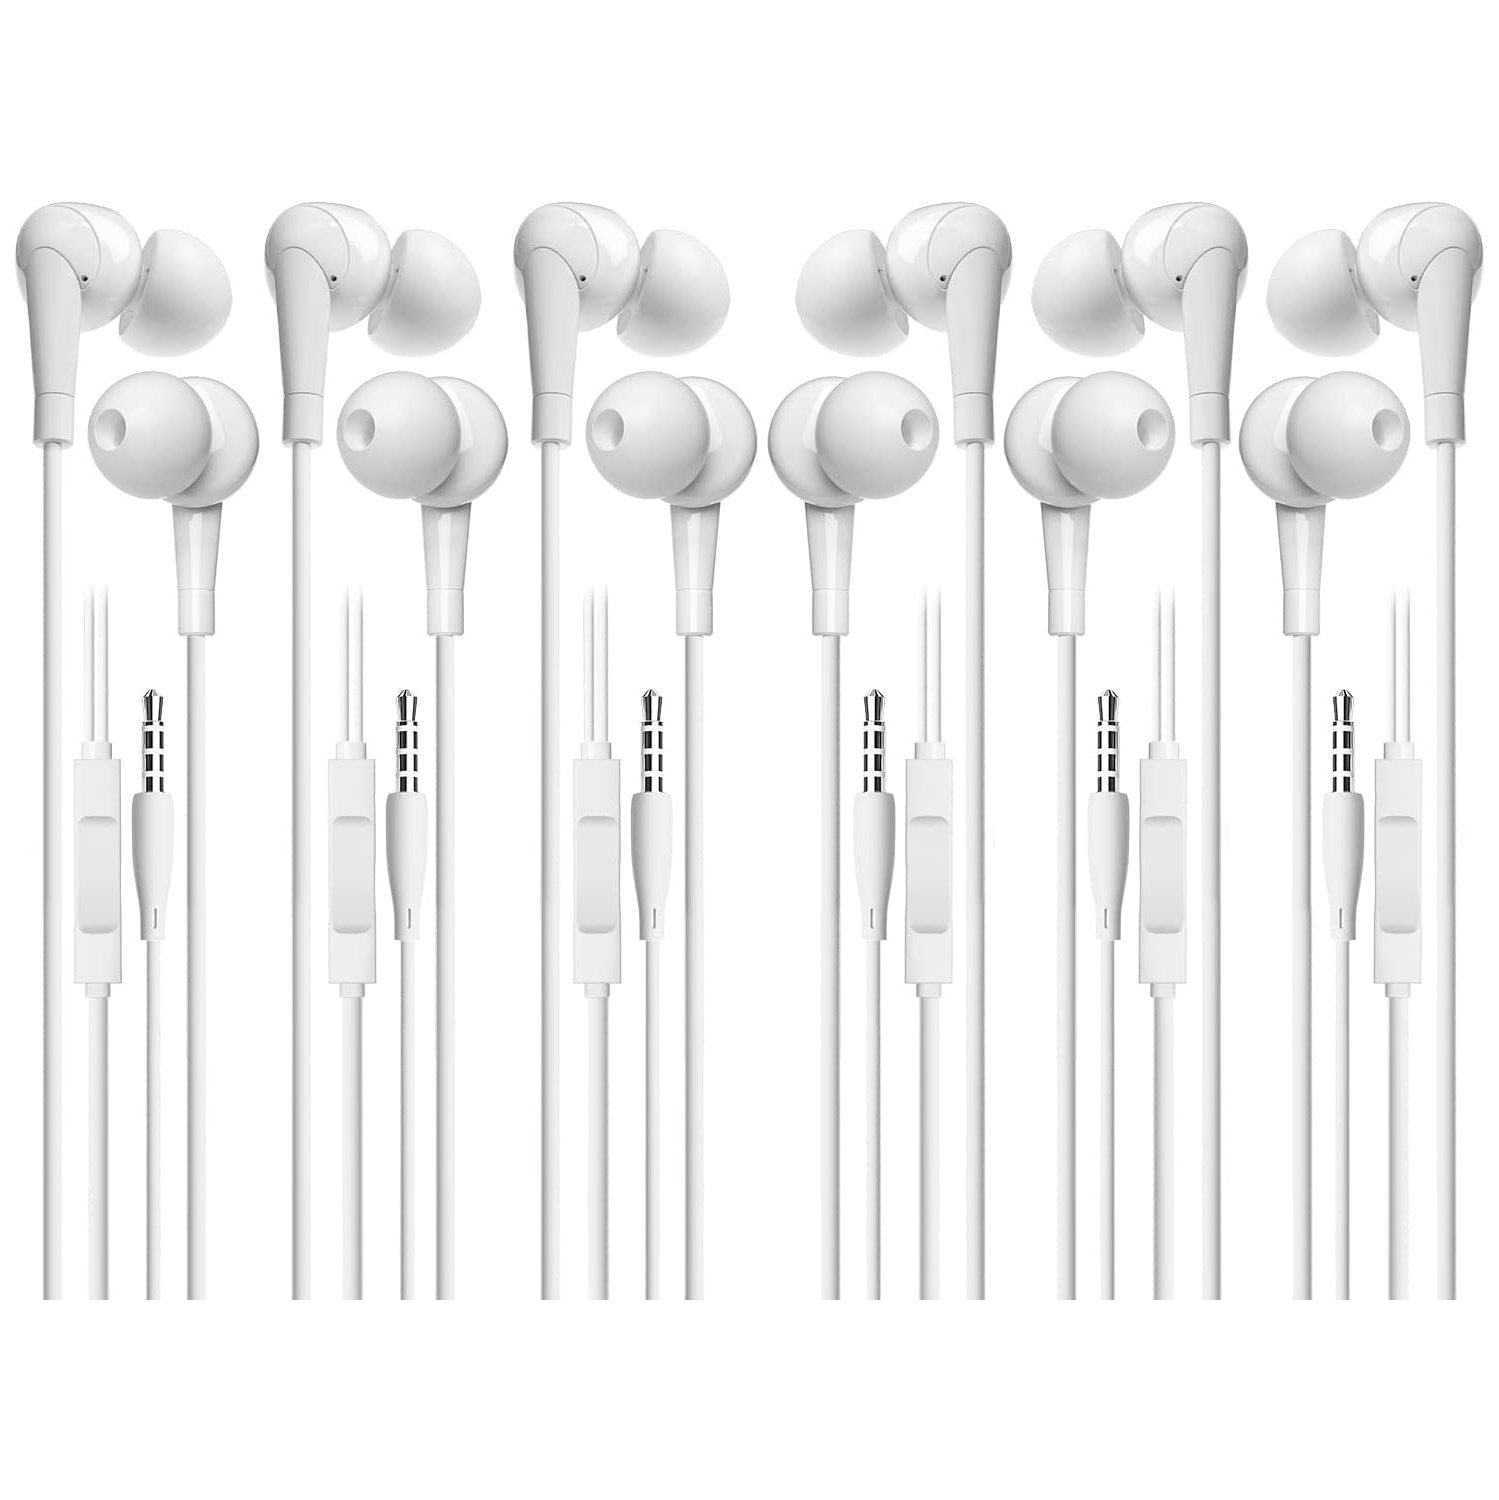 Dolaer 6 Pack Earbuds Stereo Earphones with Microphone Headphones Bass in Ear Earbud Headphones Compatible Mobile Phones, Tablets, MP3 and Other 3.5 mm Audio Device